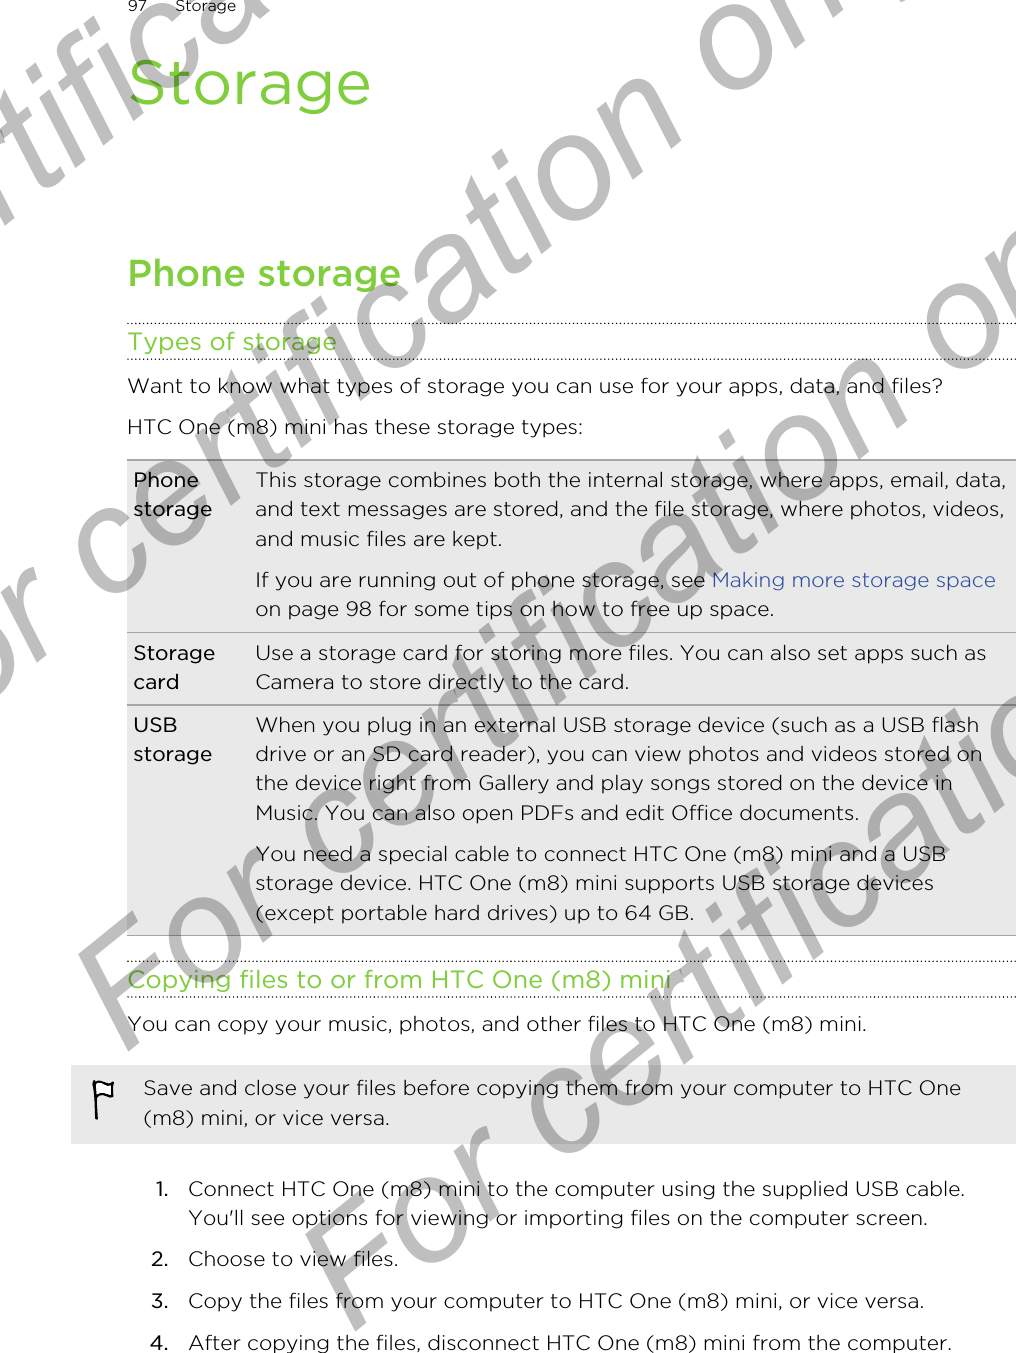 StoragePhone storageTypes of storageWant to know what types of storage you can use for your apps, data, and files?HTC One (m8) mini has these storage types:PhonestorageThis storage combines both the internal storage, where apps, email, data,and text messages are stored, and the file storage, where photos, videos,and music files are kept.If you are running out of phone storage, see Making more storage spaceon page 98 for some tips on how to free up space.StoragecardUse a storage card for storing more files. You can also set apps such asCamera to store directly to the card.USBstorageWhen you plug in an external USB storage device (such as a USB flashdrive or an SD card reader), you can view photos and videos stored onthe device right from Gallery and play songs stored on the device inMusic. You can also open PDFs and edit Office documents.You need a special cable to connect HTC One (m8) mini and a USBstorage device. HTC One (m8) mini supports USB storage devices(except portable hard drives) up to 64 GB.Copying files to or from HTC One (m8) miniYou can copy your music, photos, and other files to HTC One (m8) mini.Save and close your files before copying them from your computer to HTC One(m8) mini, or vice versa.1. Connect HTC One (m8) mini to the computer using the supplied USB cable.You&apos;ll see options for viewing or importing files on the computer screen.2. Choose to view files.3. Copy the files from your computer to HTC One (m8) mini, or vice versa.4. After copying the files, disconnect HTC One (m8) mini from the computer.97 StorageFor certification only  For certification only  For certification only  For certification only 